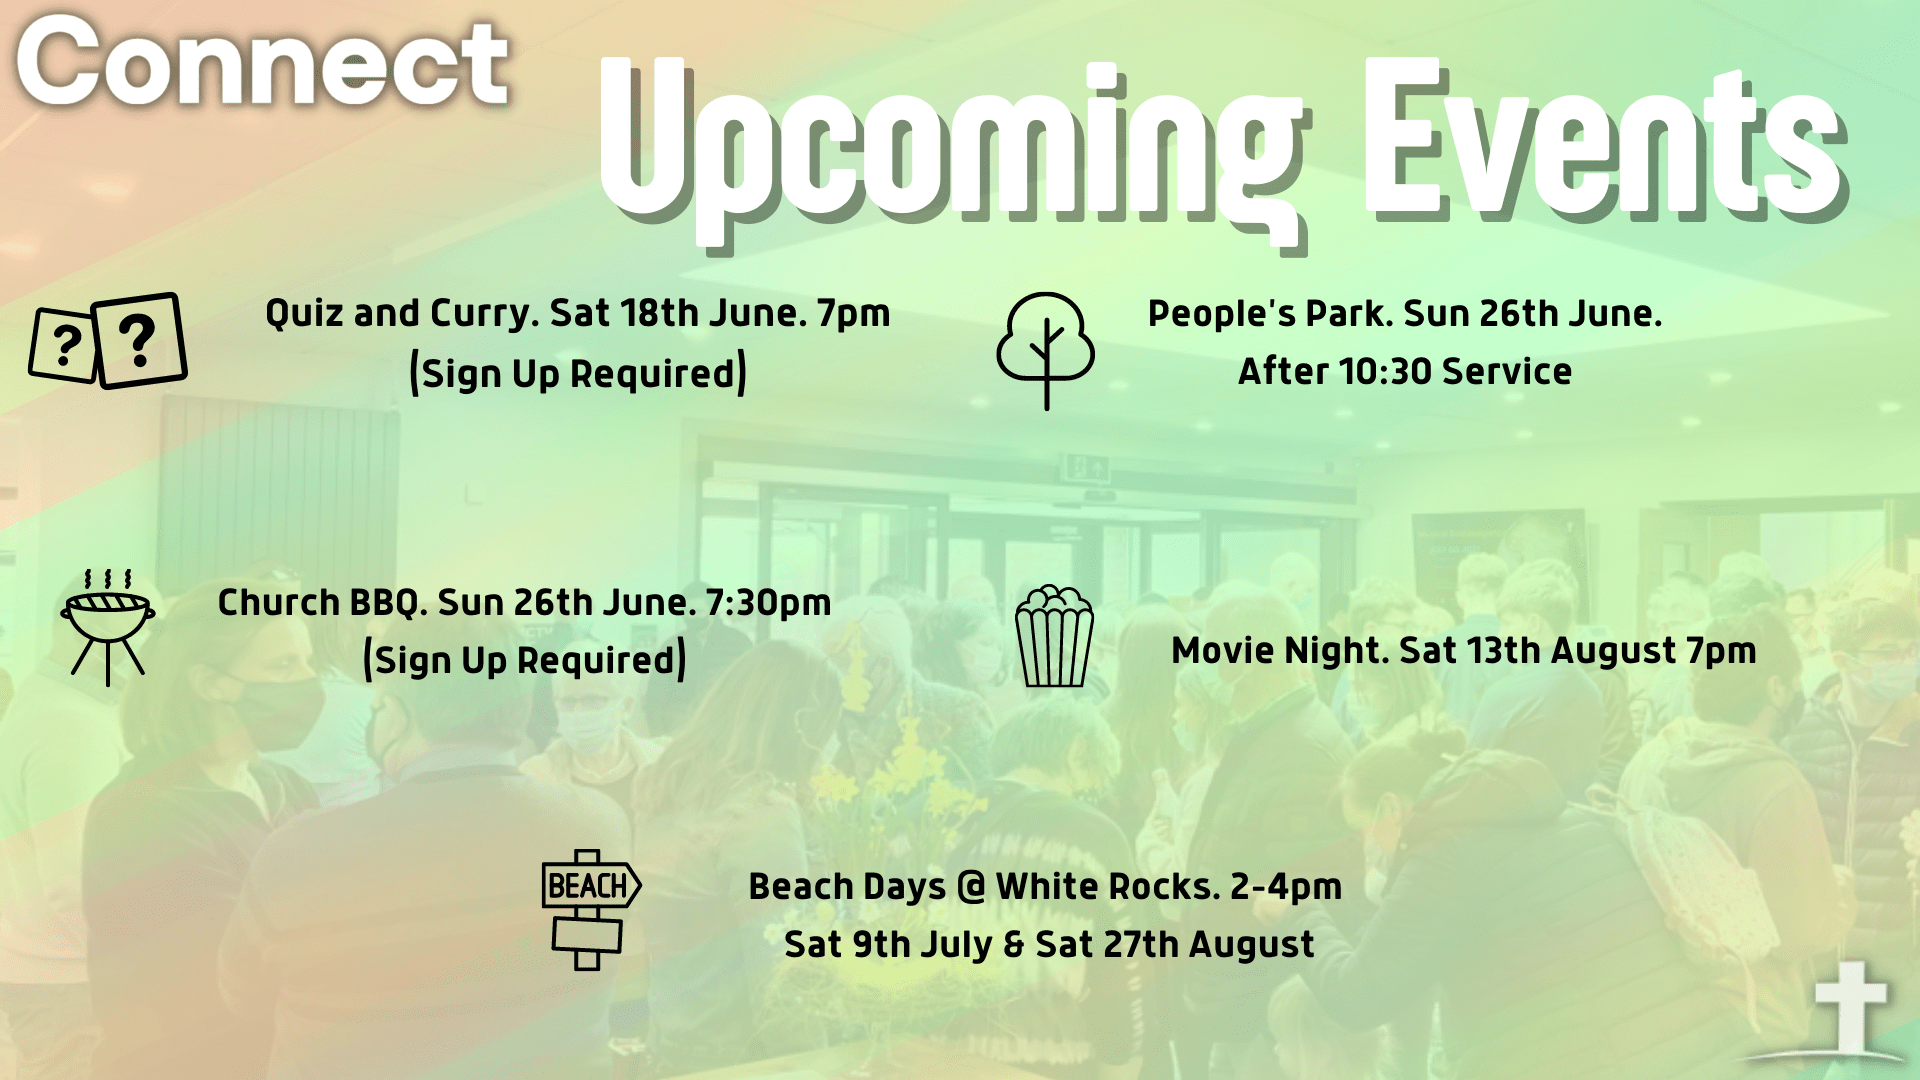 Connect Events